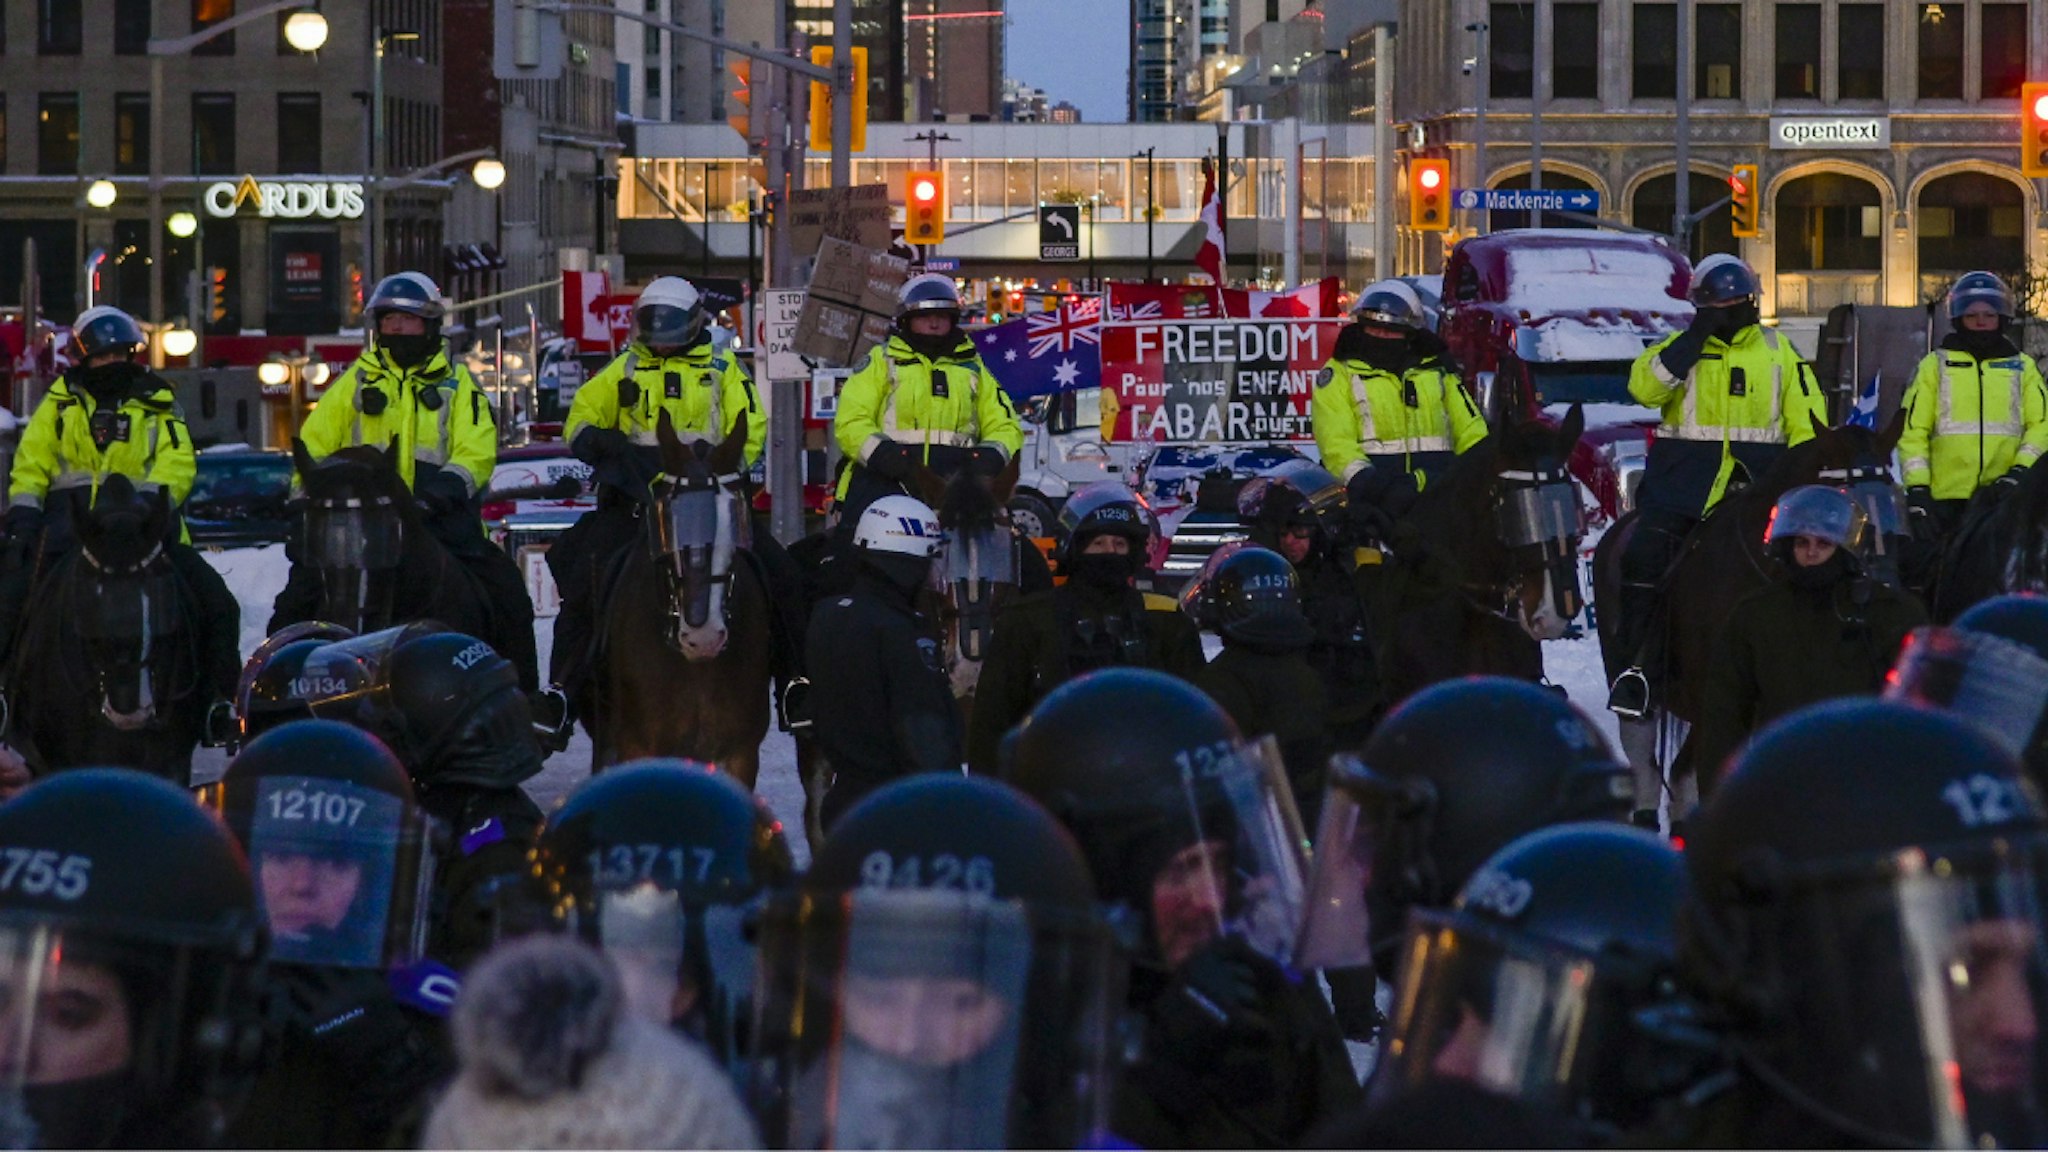 Horse-mounted law enforcement officers form a line during a demonstration in Ottawa, Ontario, Canada, on Friday, Feb. 18, 2022. Police have begun an extensive operation to lock down the city center of Ottawa to clear the streets of demonstrators, along with dozens of semi-trailers.